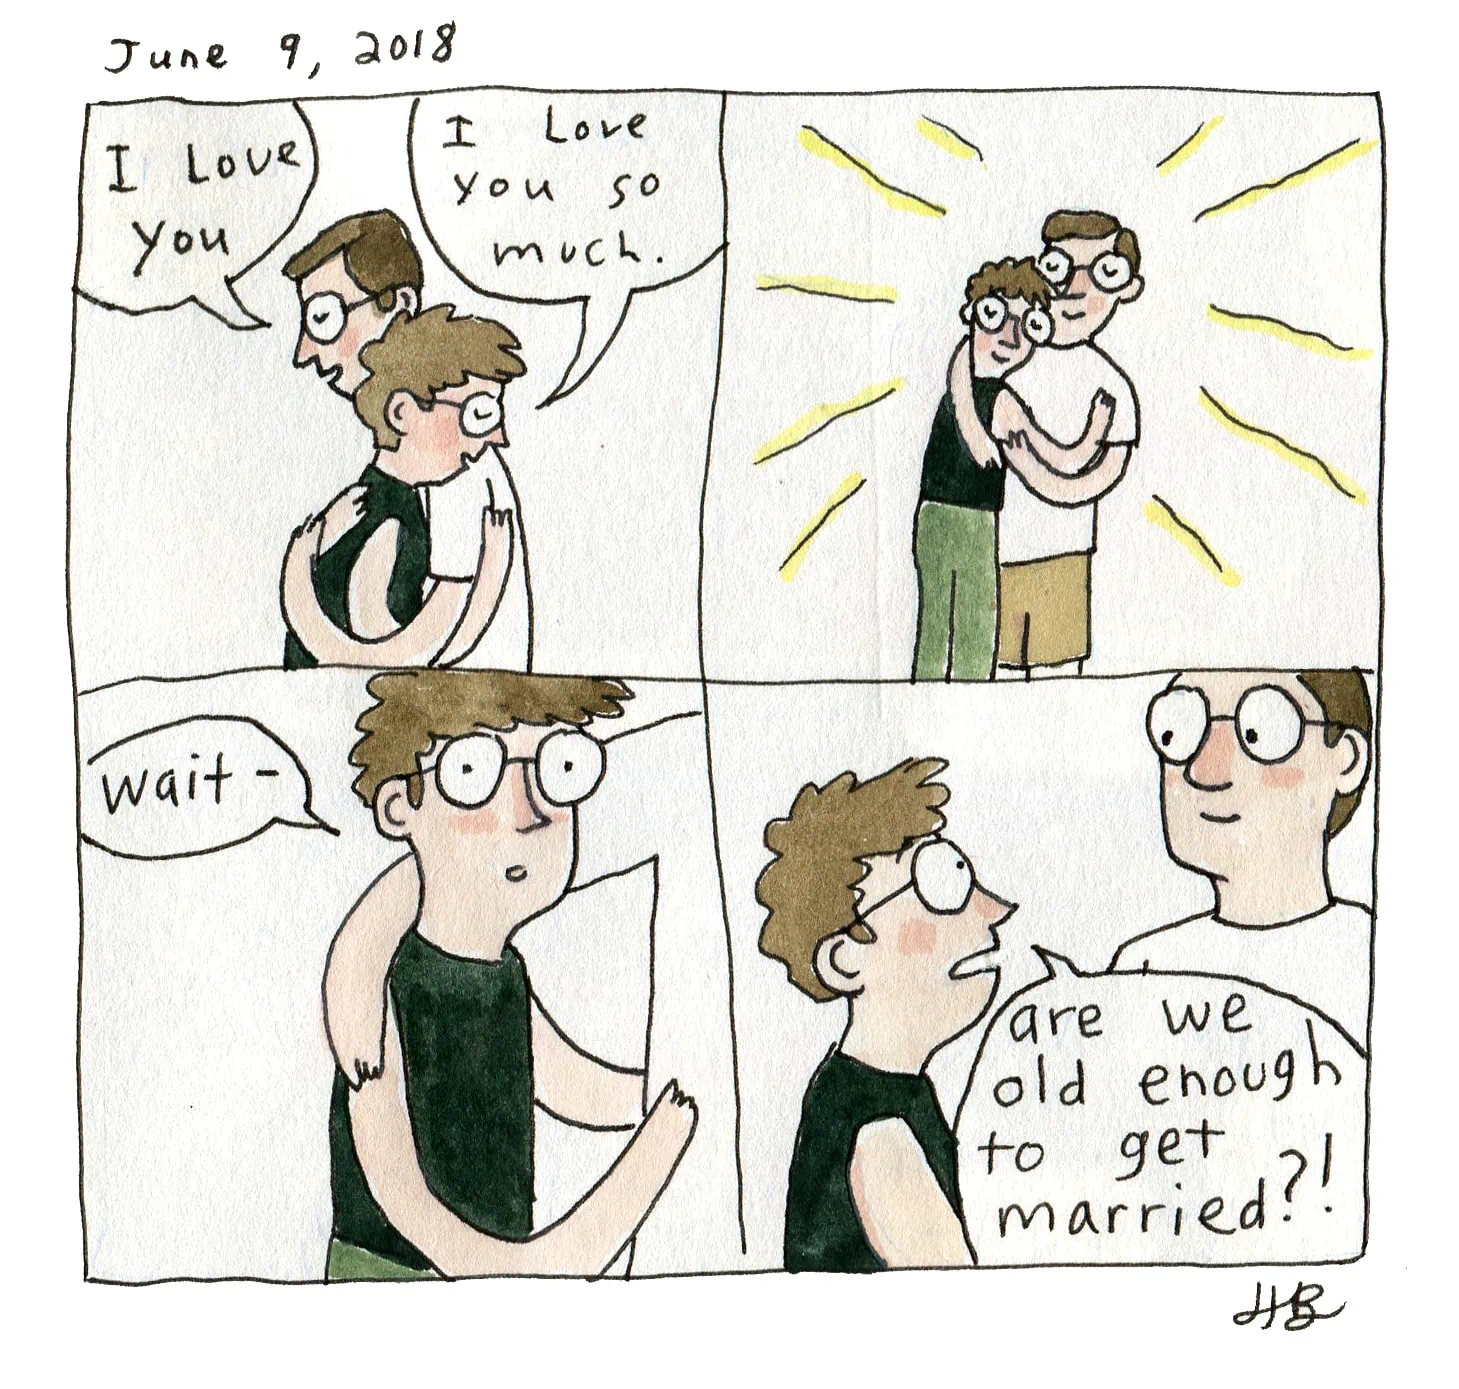 comic illustration in four panels of a couple hugging and talking. In the first panel they say "I love you" and "I love you so much." The second panel has them looking happy and surprised. The third panel has one person saying "wait-" and in the fourth panel one figure says "are we old enough to get married?!"